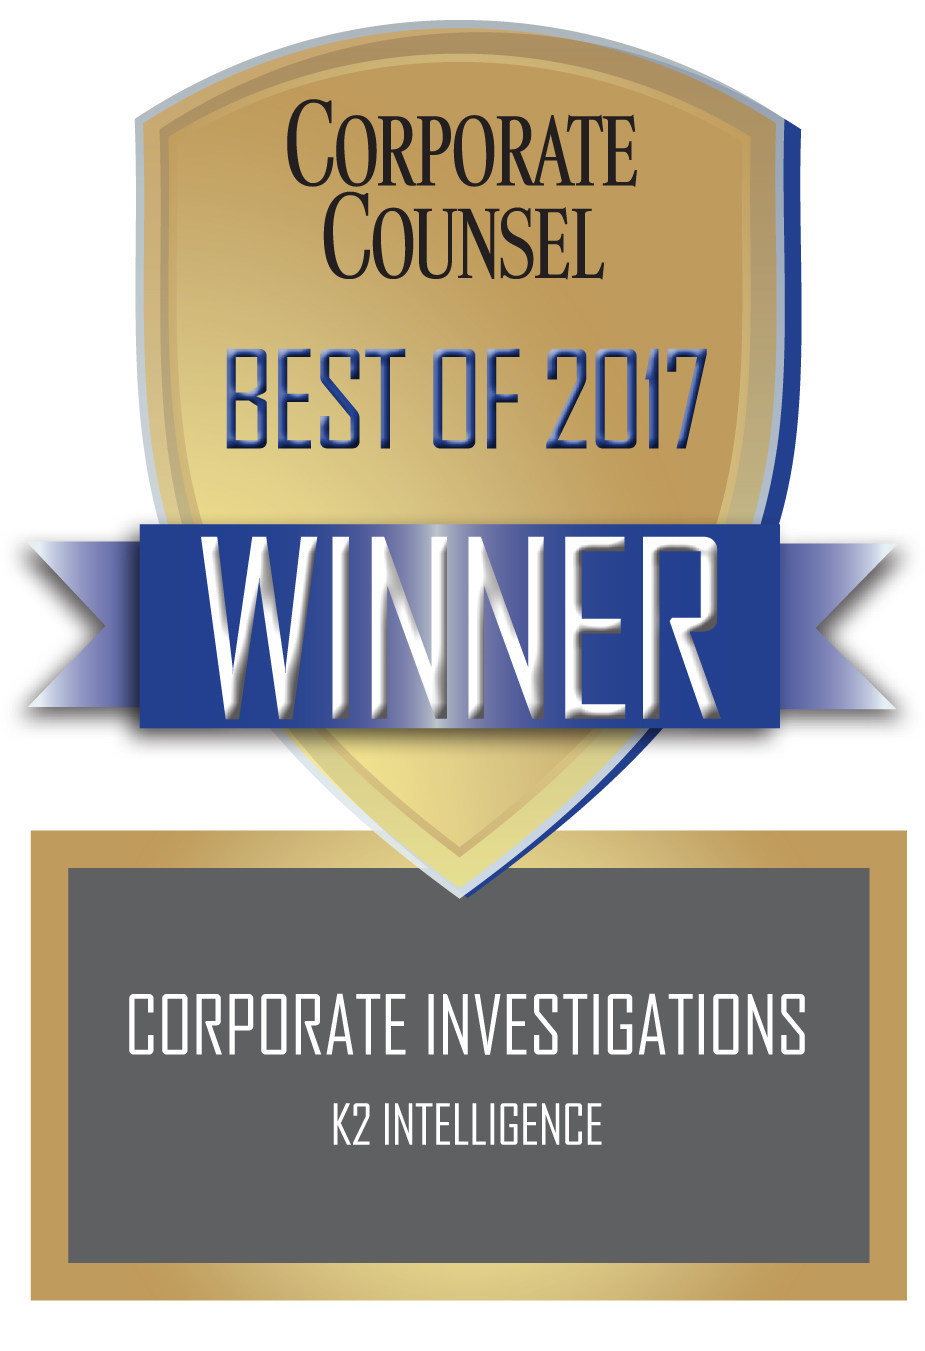 K2 Intelligence Named Top Corporate Investigations Provider in Corporate Counsel Reader Ranking Survey